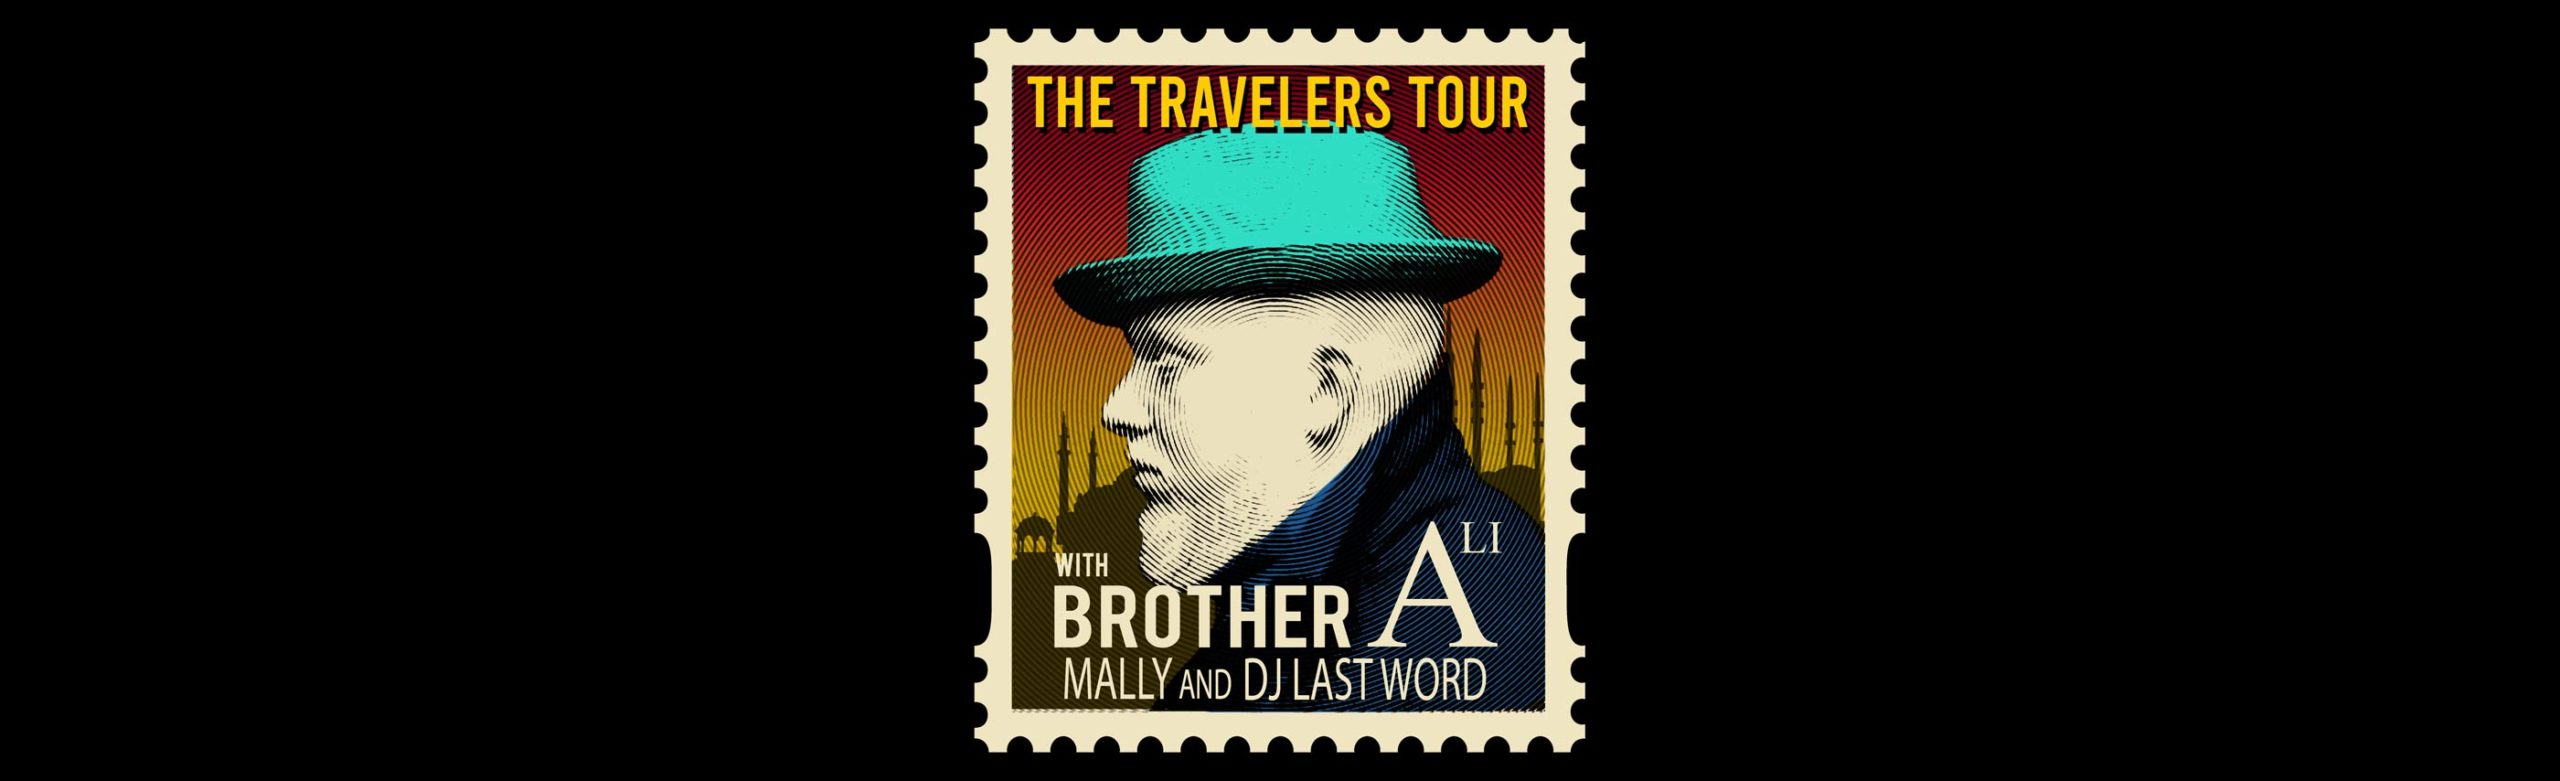 Brother Ali Tickets + Tour T-Shirt Giveaway Image